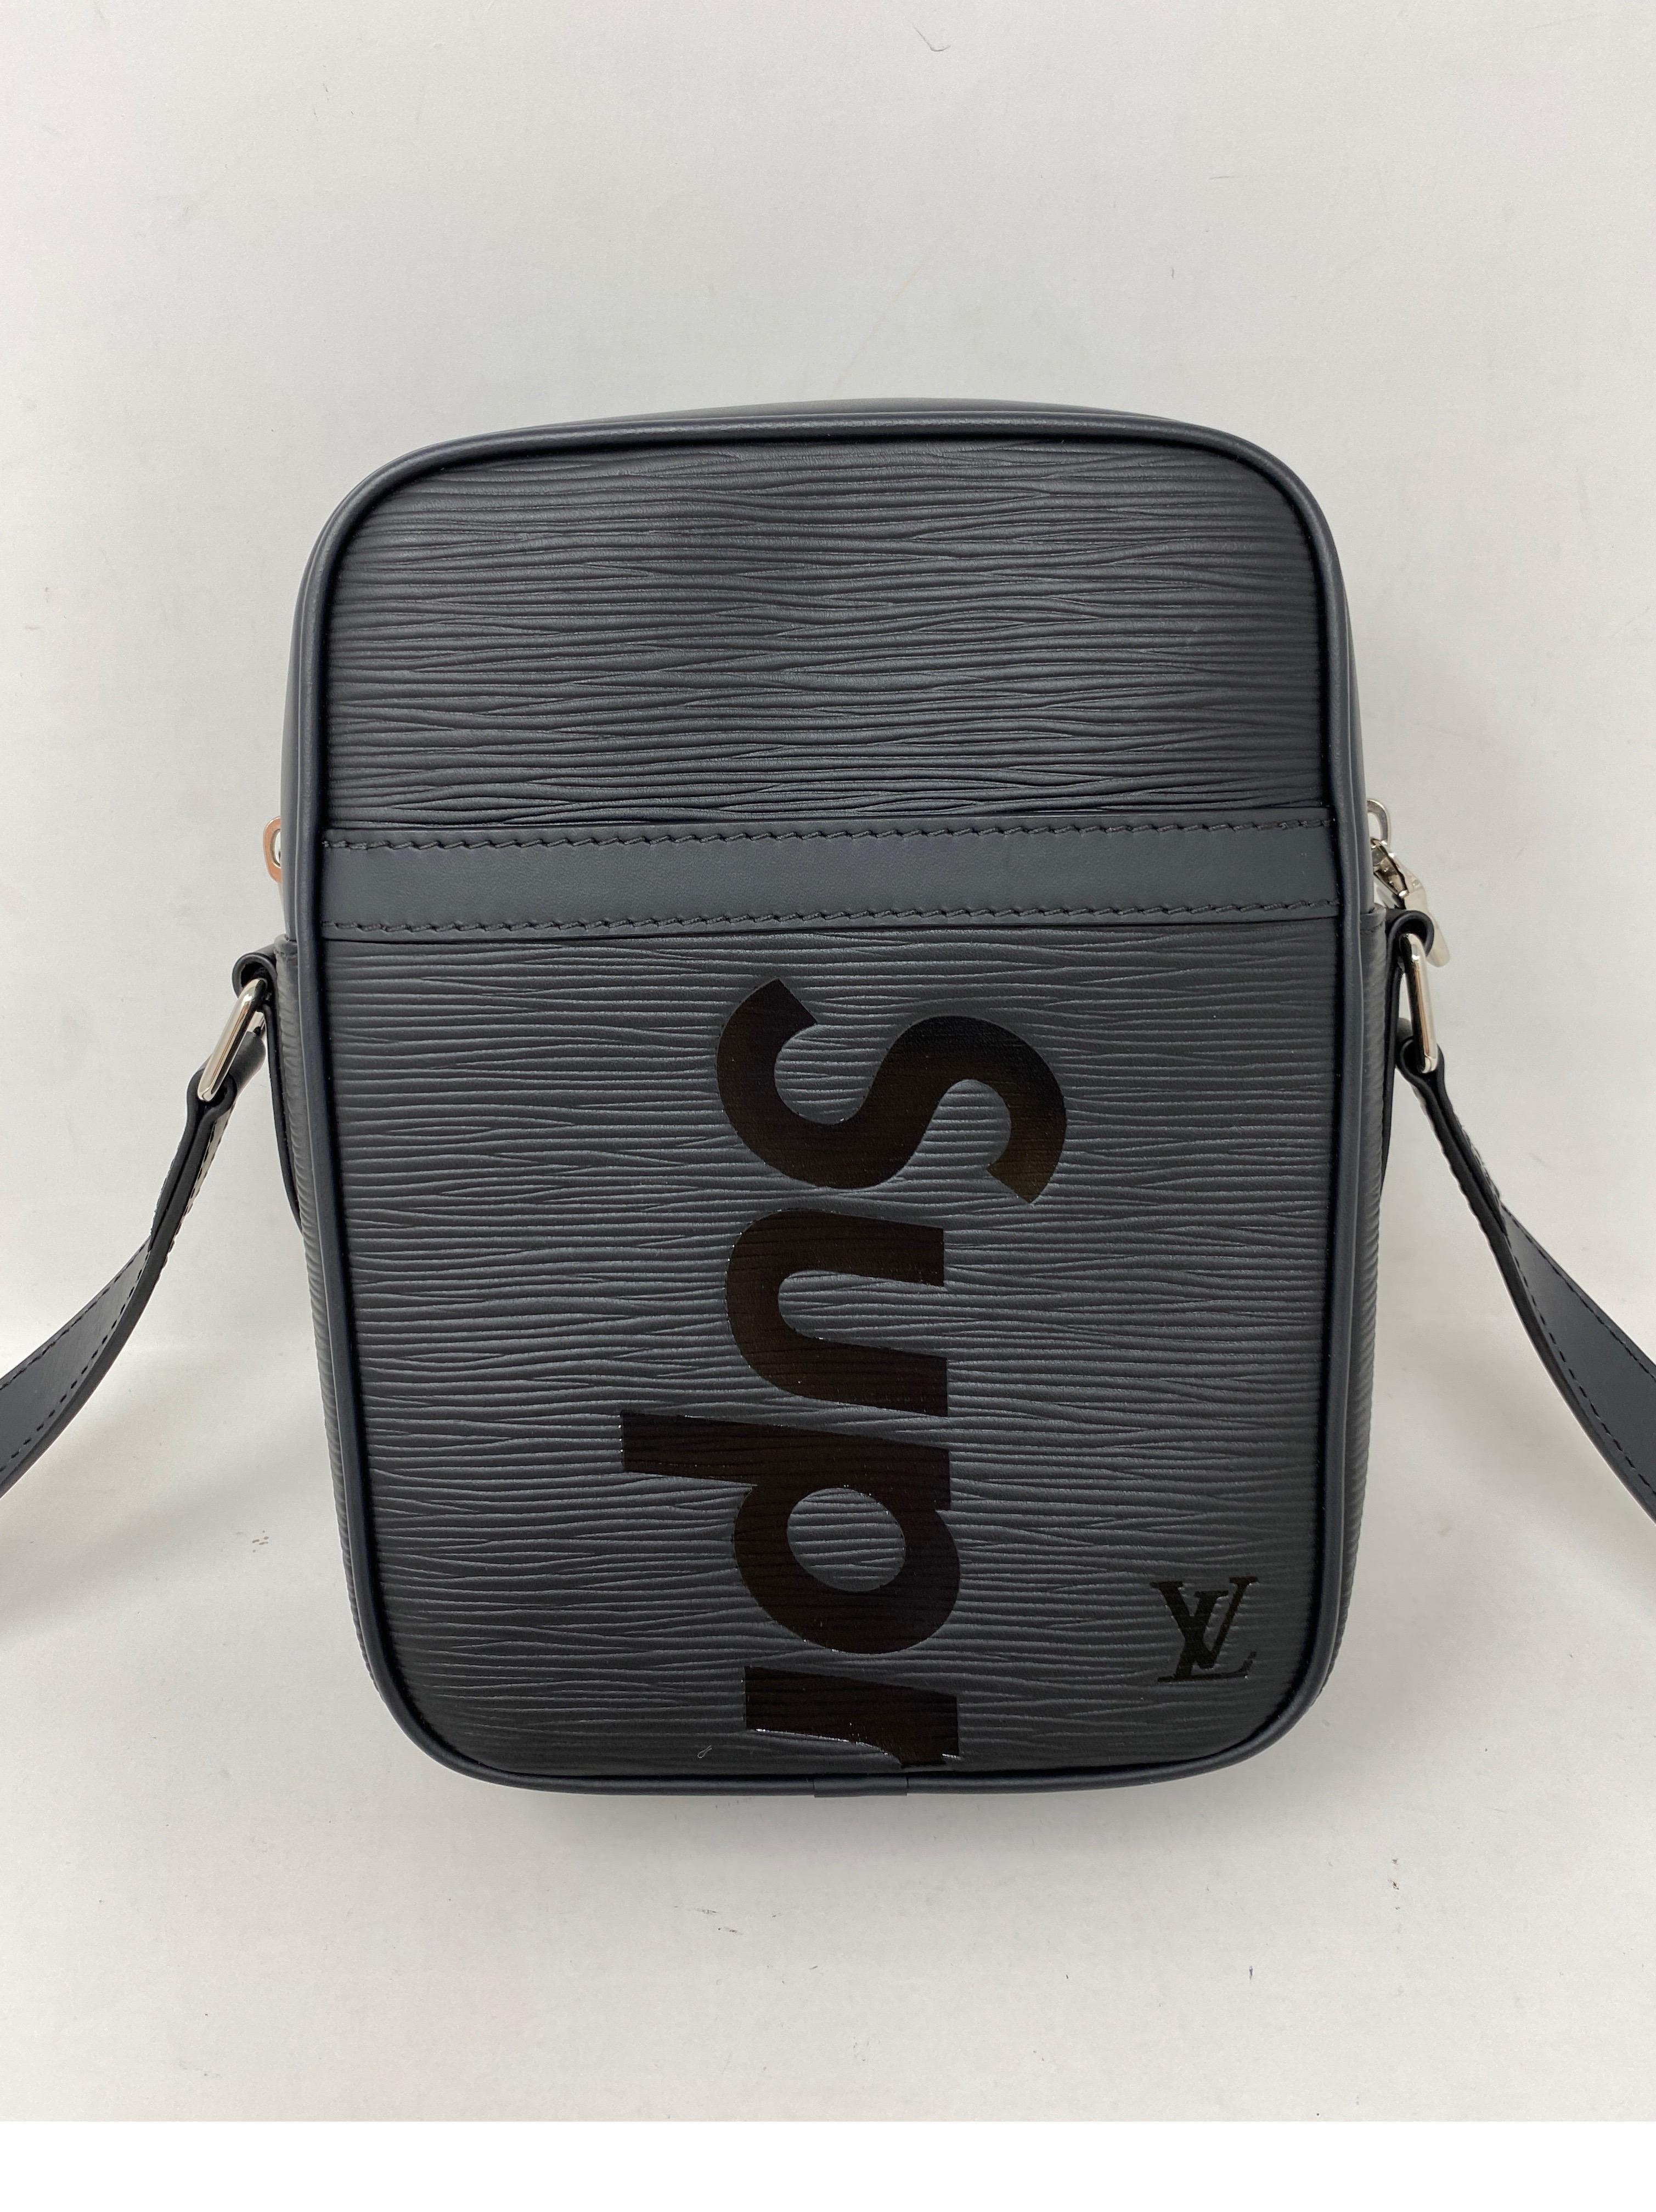 Louis Vuitton Black Supreme Crossbody Bag. Louis Vuitton and Supreme collaboration. Mint like new condition. Rare and limited. Collector's piece. Guaranteed authentic. 